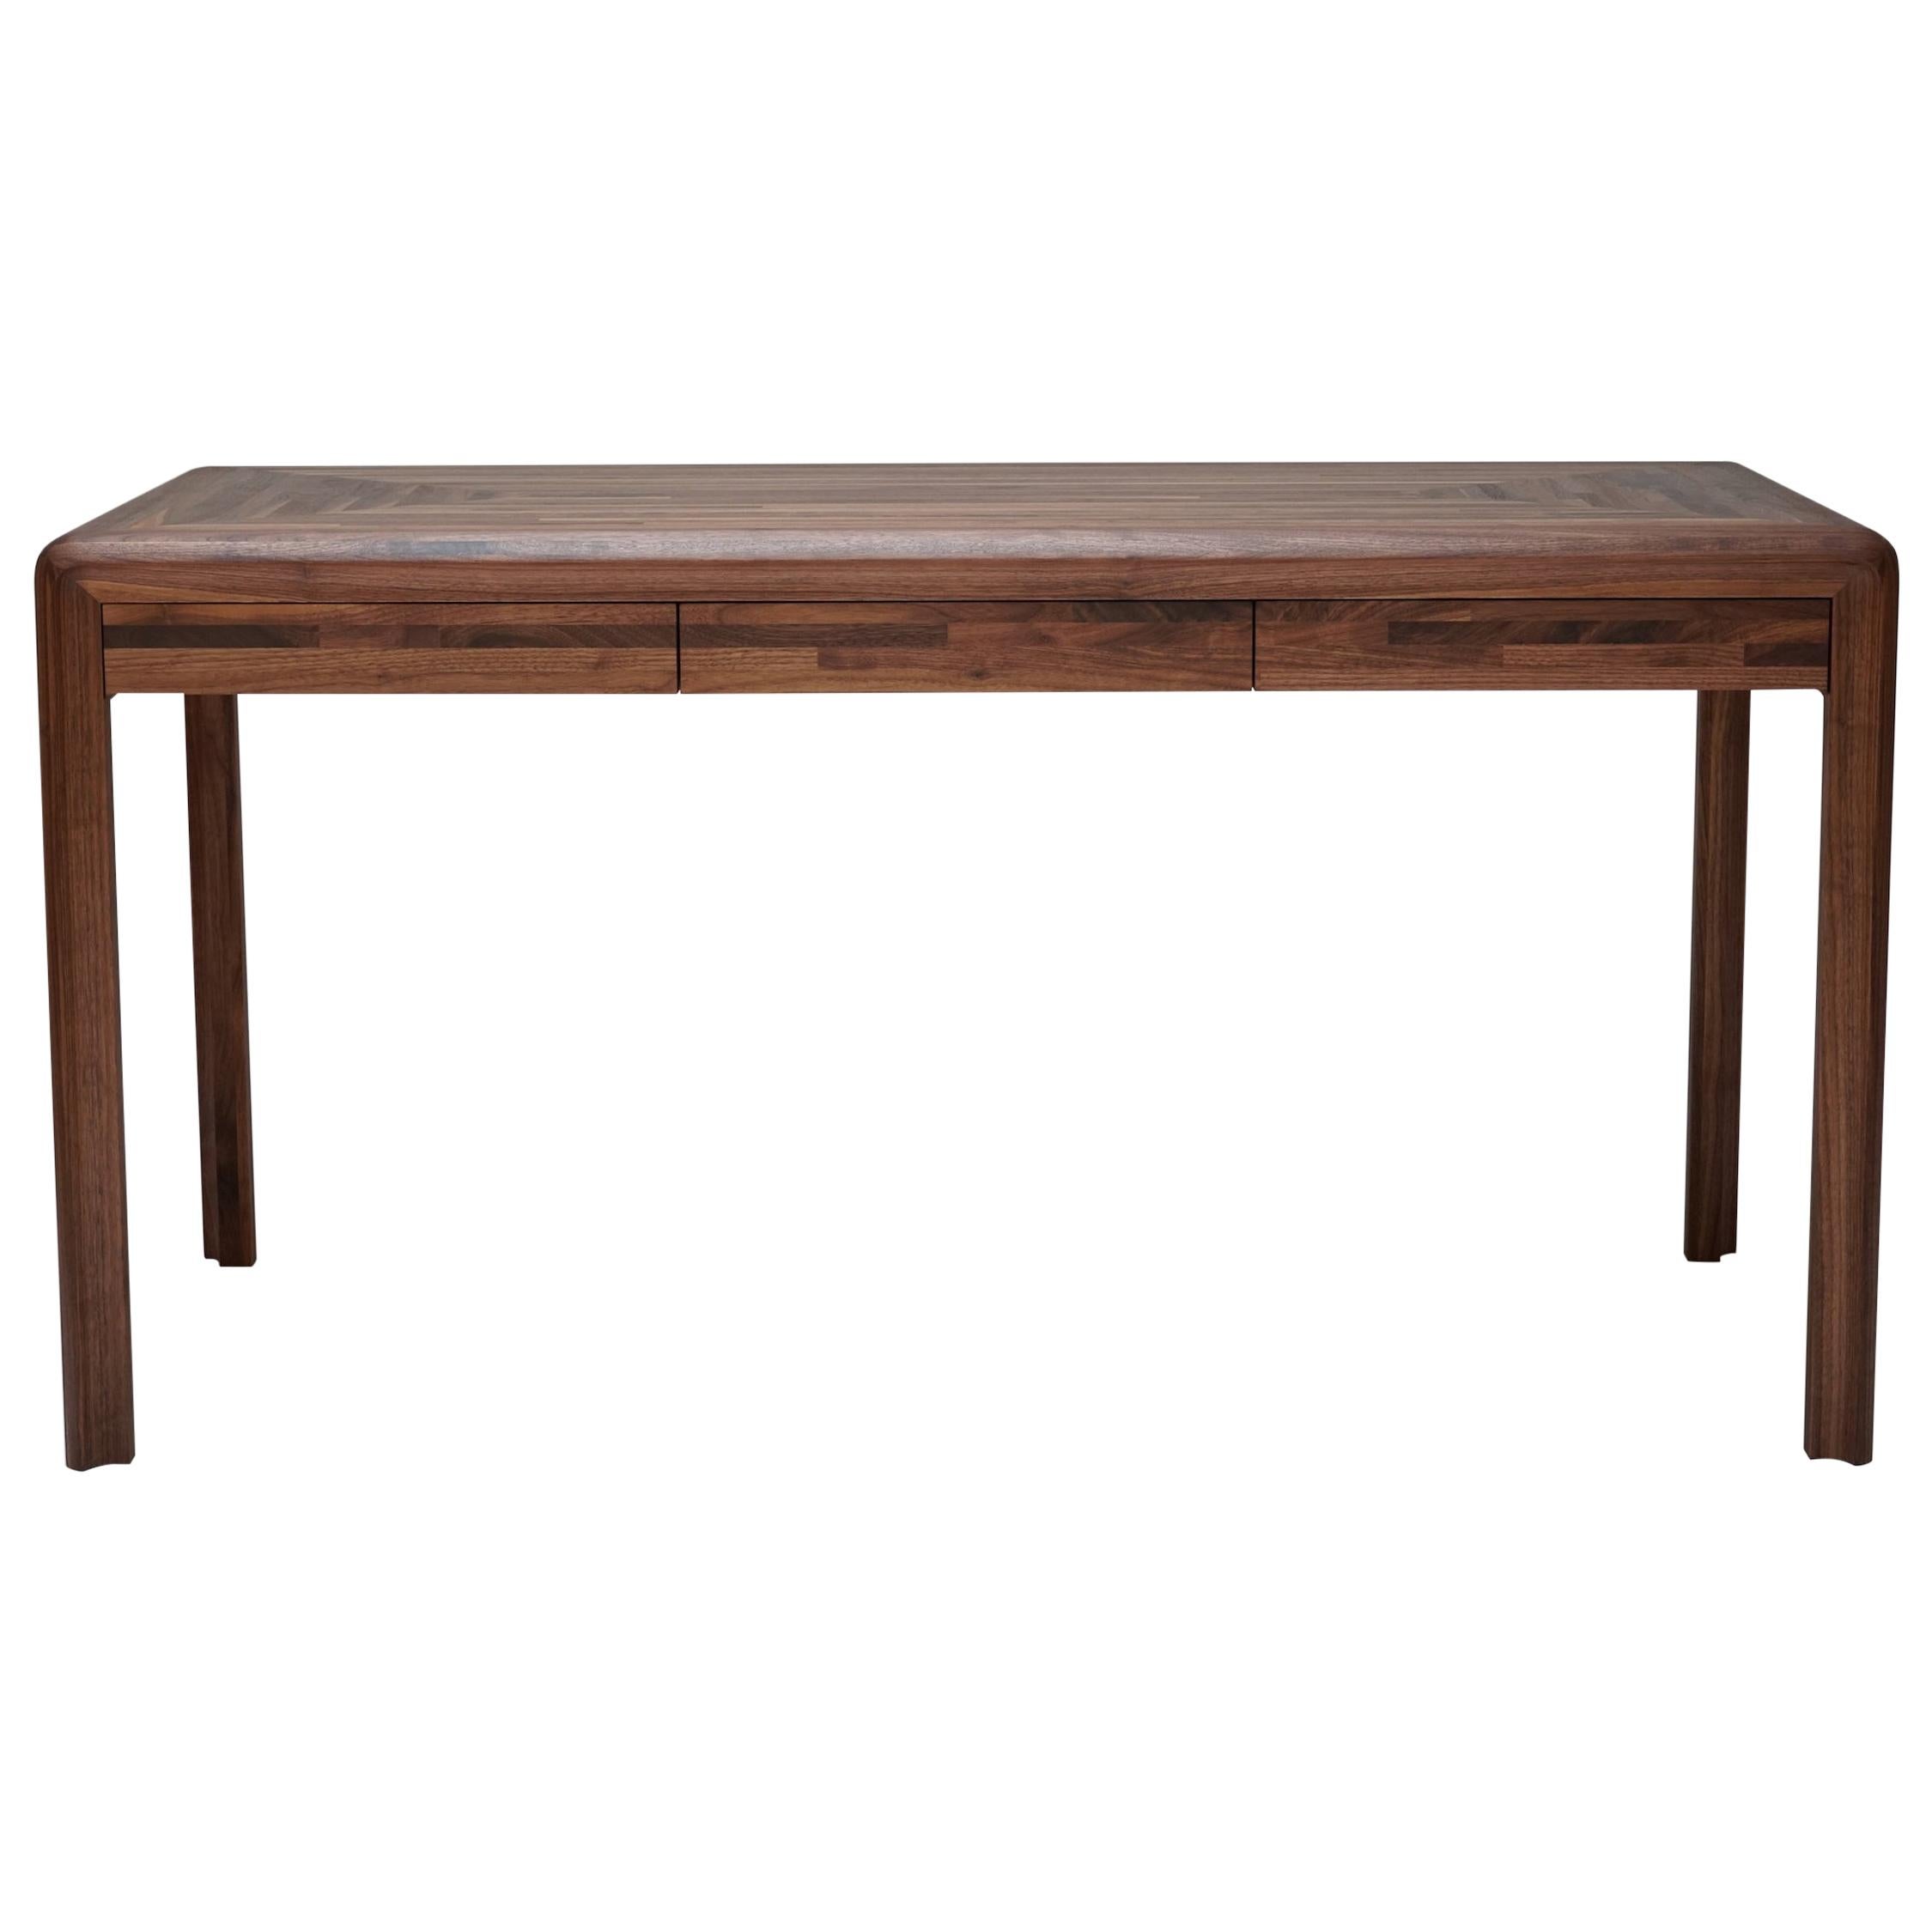 Radiused outer edges and scalloped inner edge create a contrasting profile that adorns this minimal desk. Made from hand oiled solid walnut, this desk blends simple lines with unique subtle details. Three deep drawers with recessed pulls offer ample